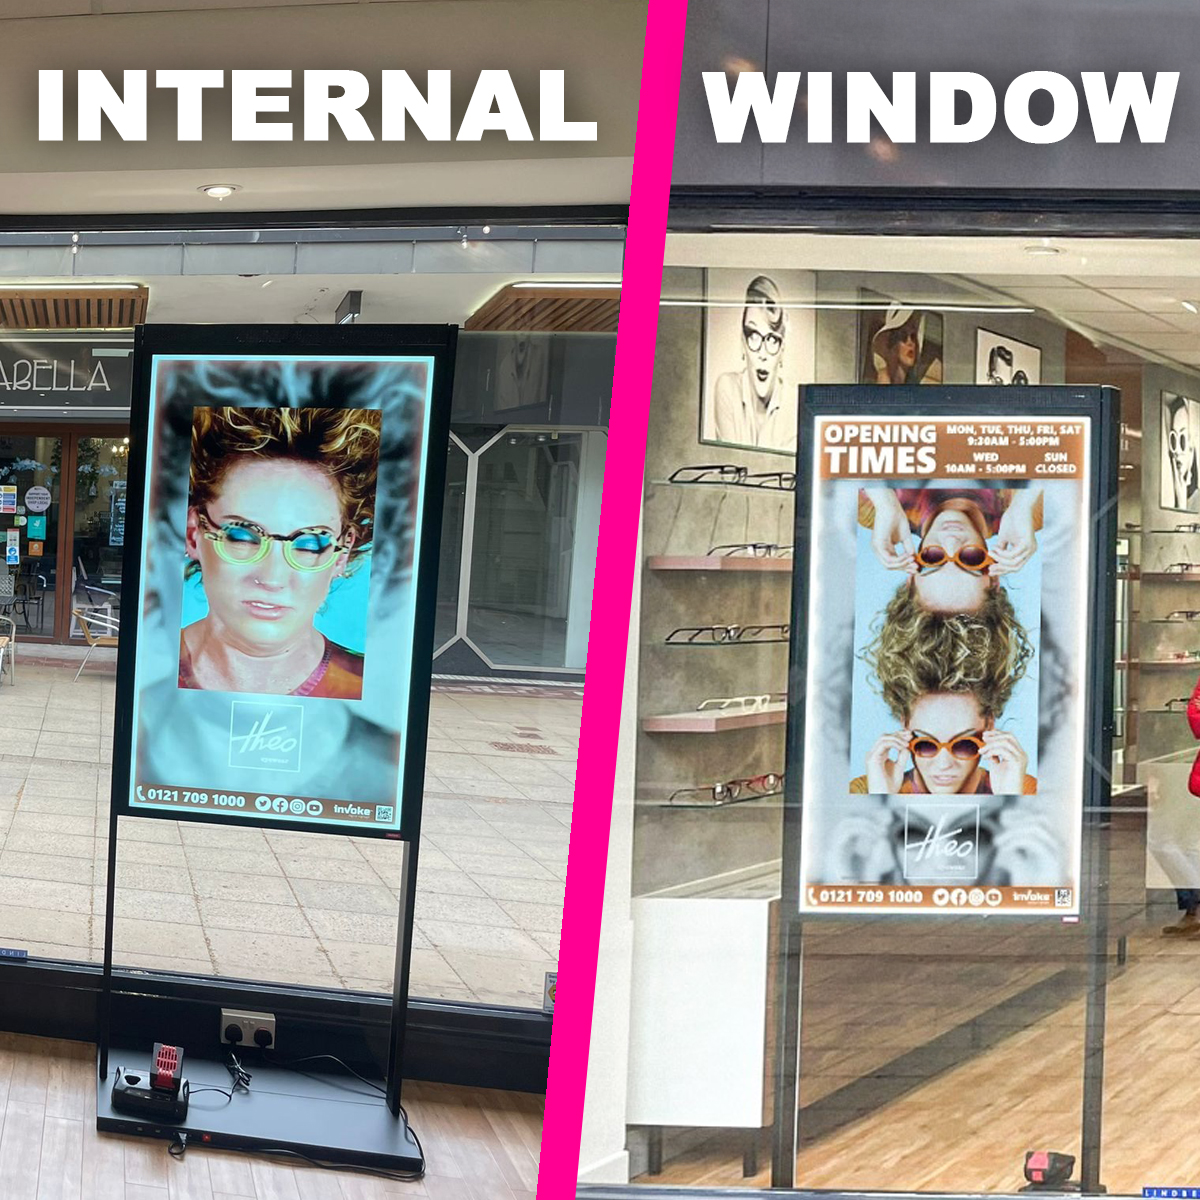 theo opticians double sided advertising screen - opening hours for shop window side and styles of glasses for in-store side